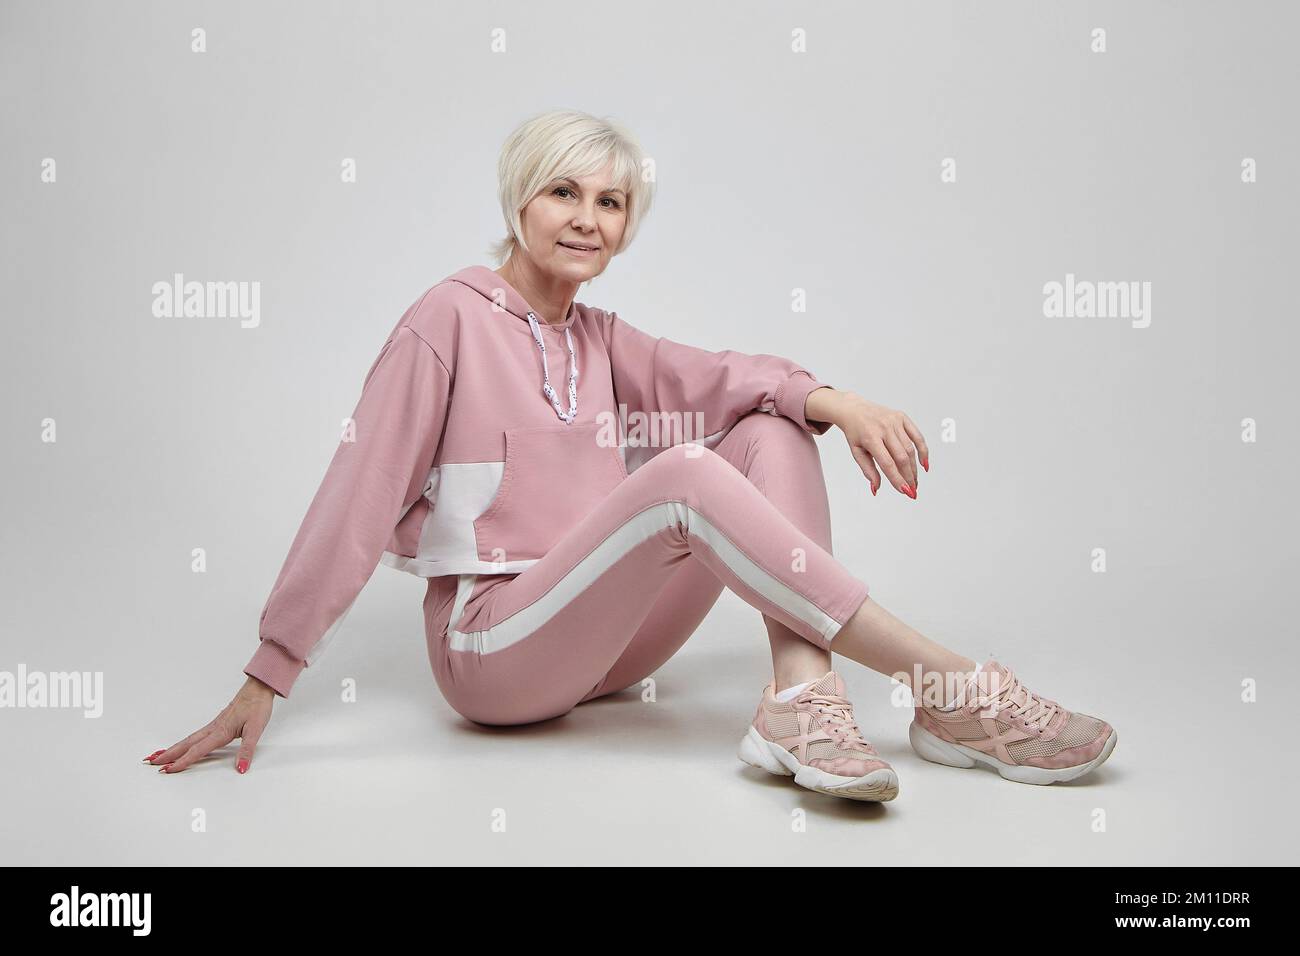 active elderly woman poses in the studio on a white background. fitness concept. Stock Photo